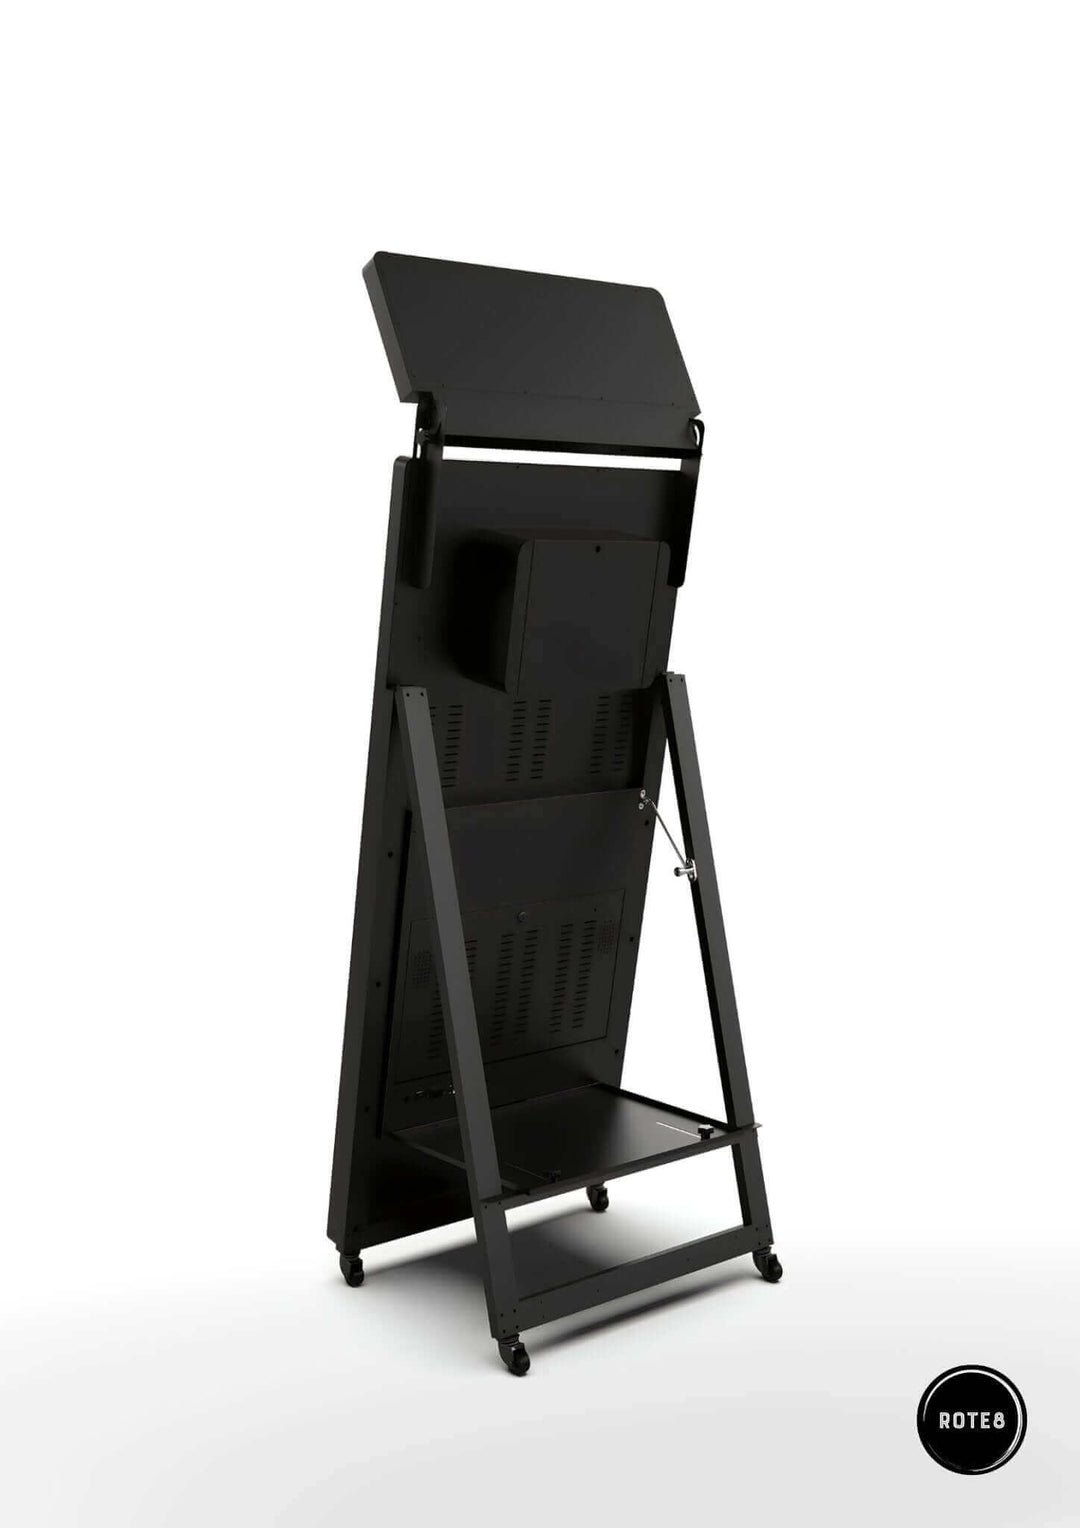 Black photo booth stand with multiple levels